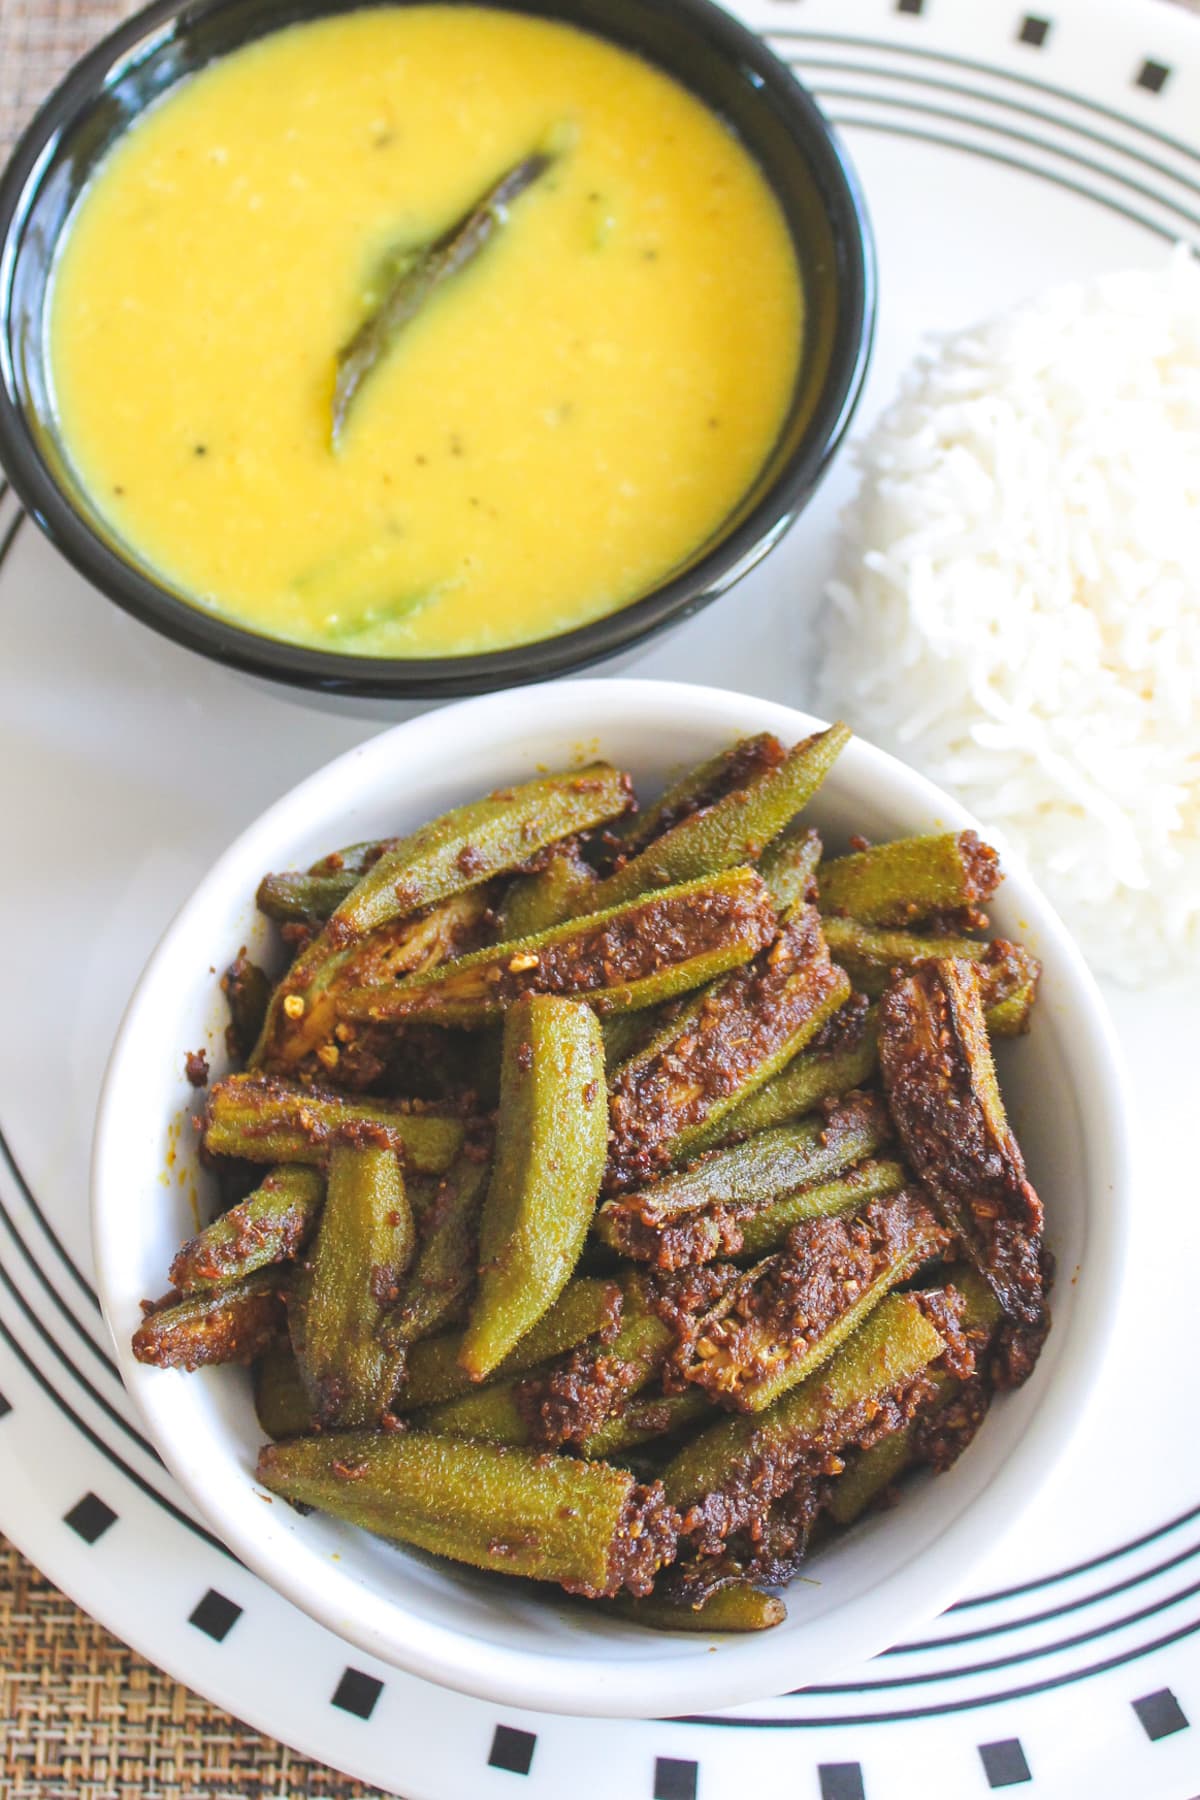 Bhindi masala served in a bowl with dal and rice.